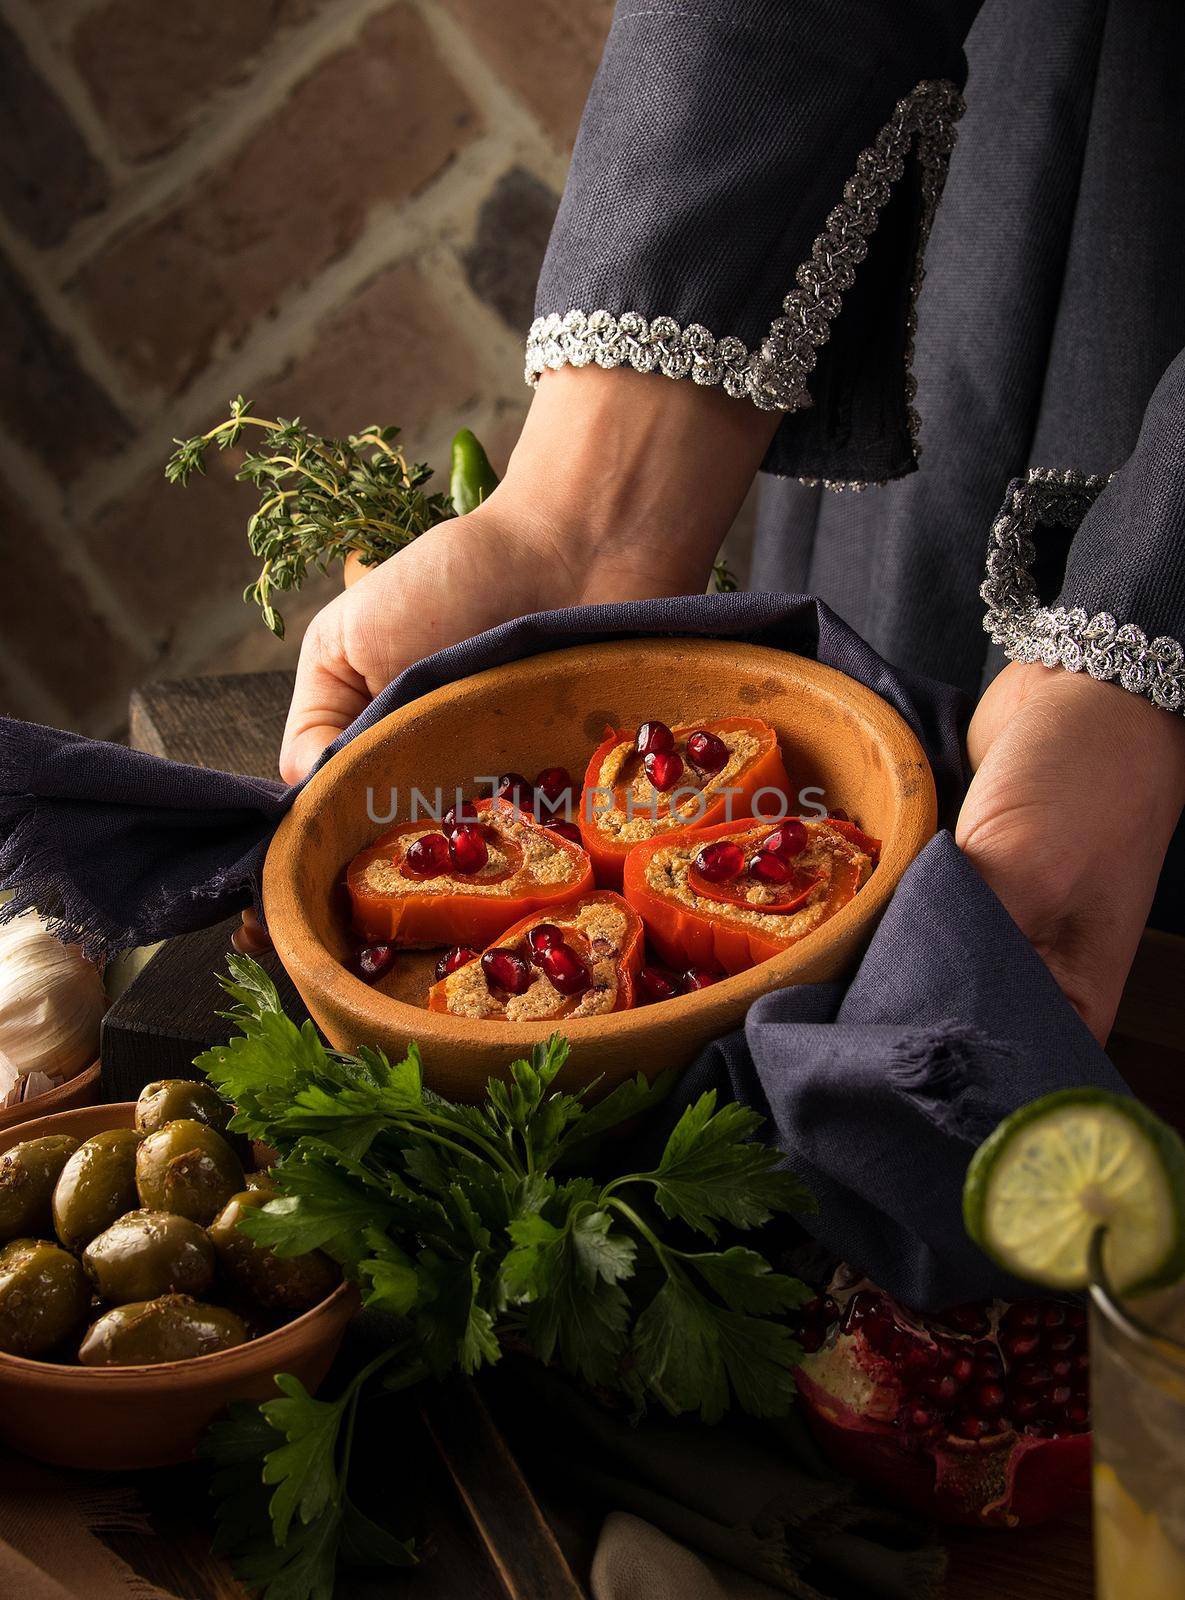 A vertical photo of woman's hands holding a plate of Baked pears with honey, walnuts and cranberries